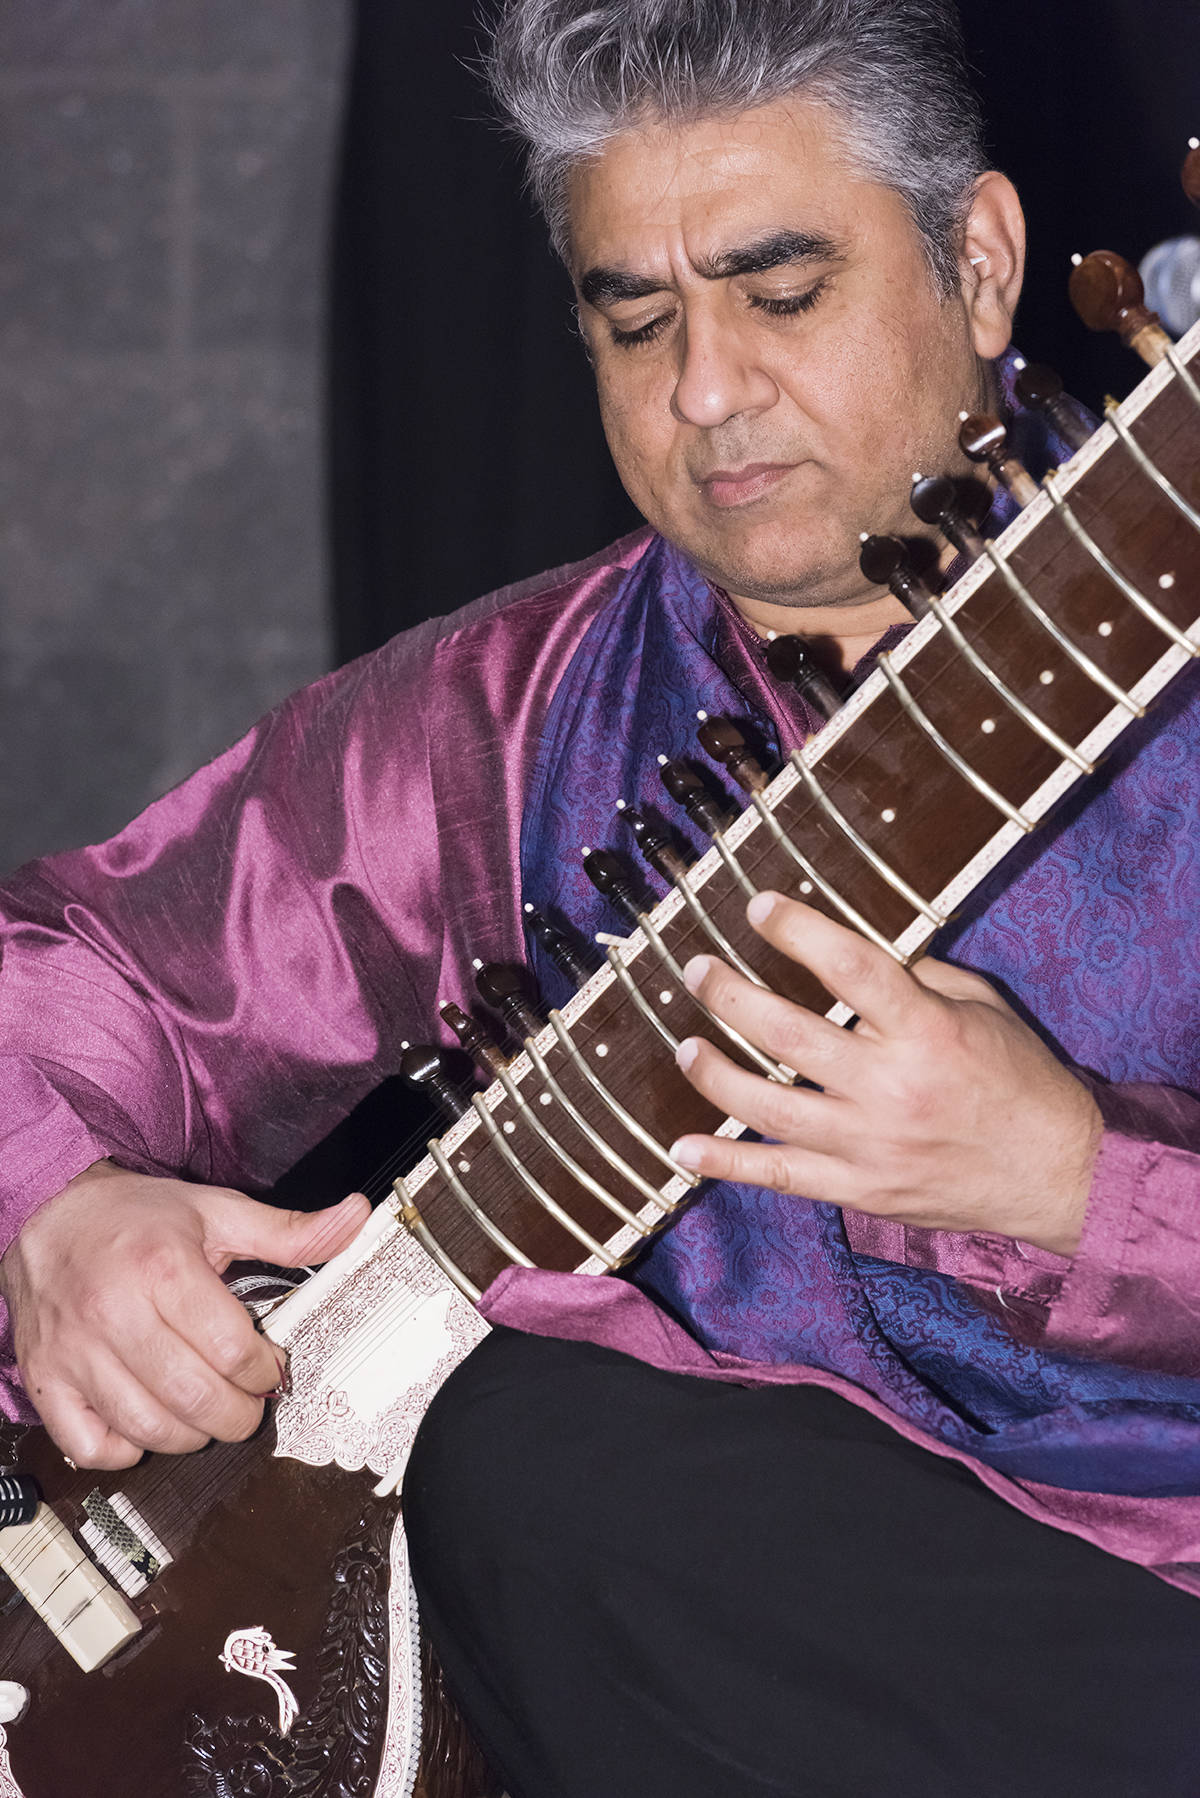 10996722_web1_Mohamed-Assani-on-sitar.-Photo-by-Brian-Giebelhaus